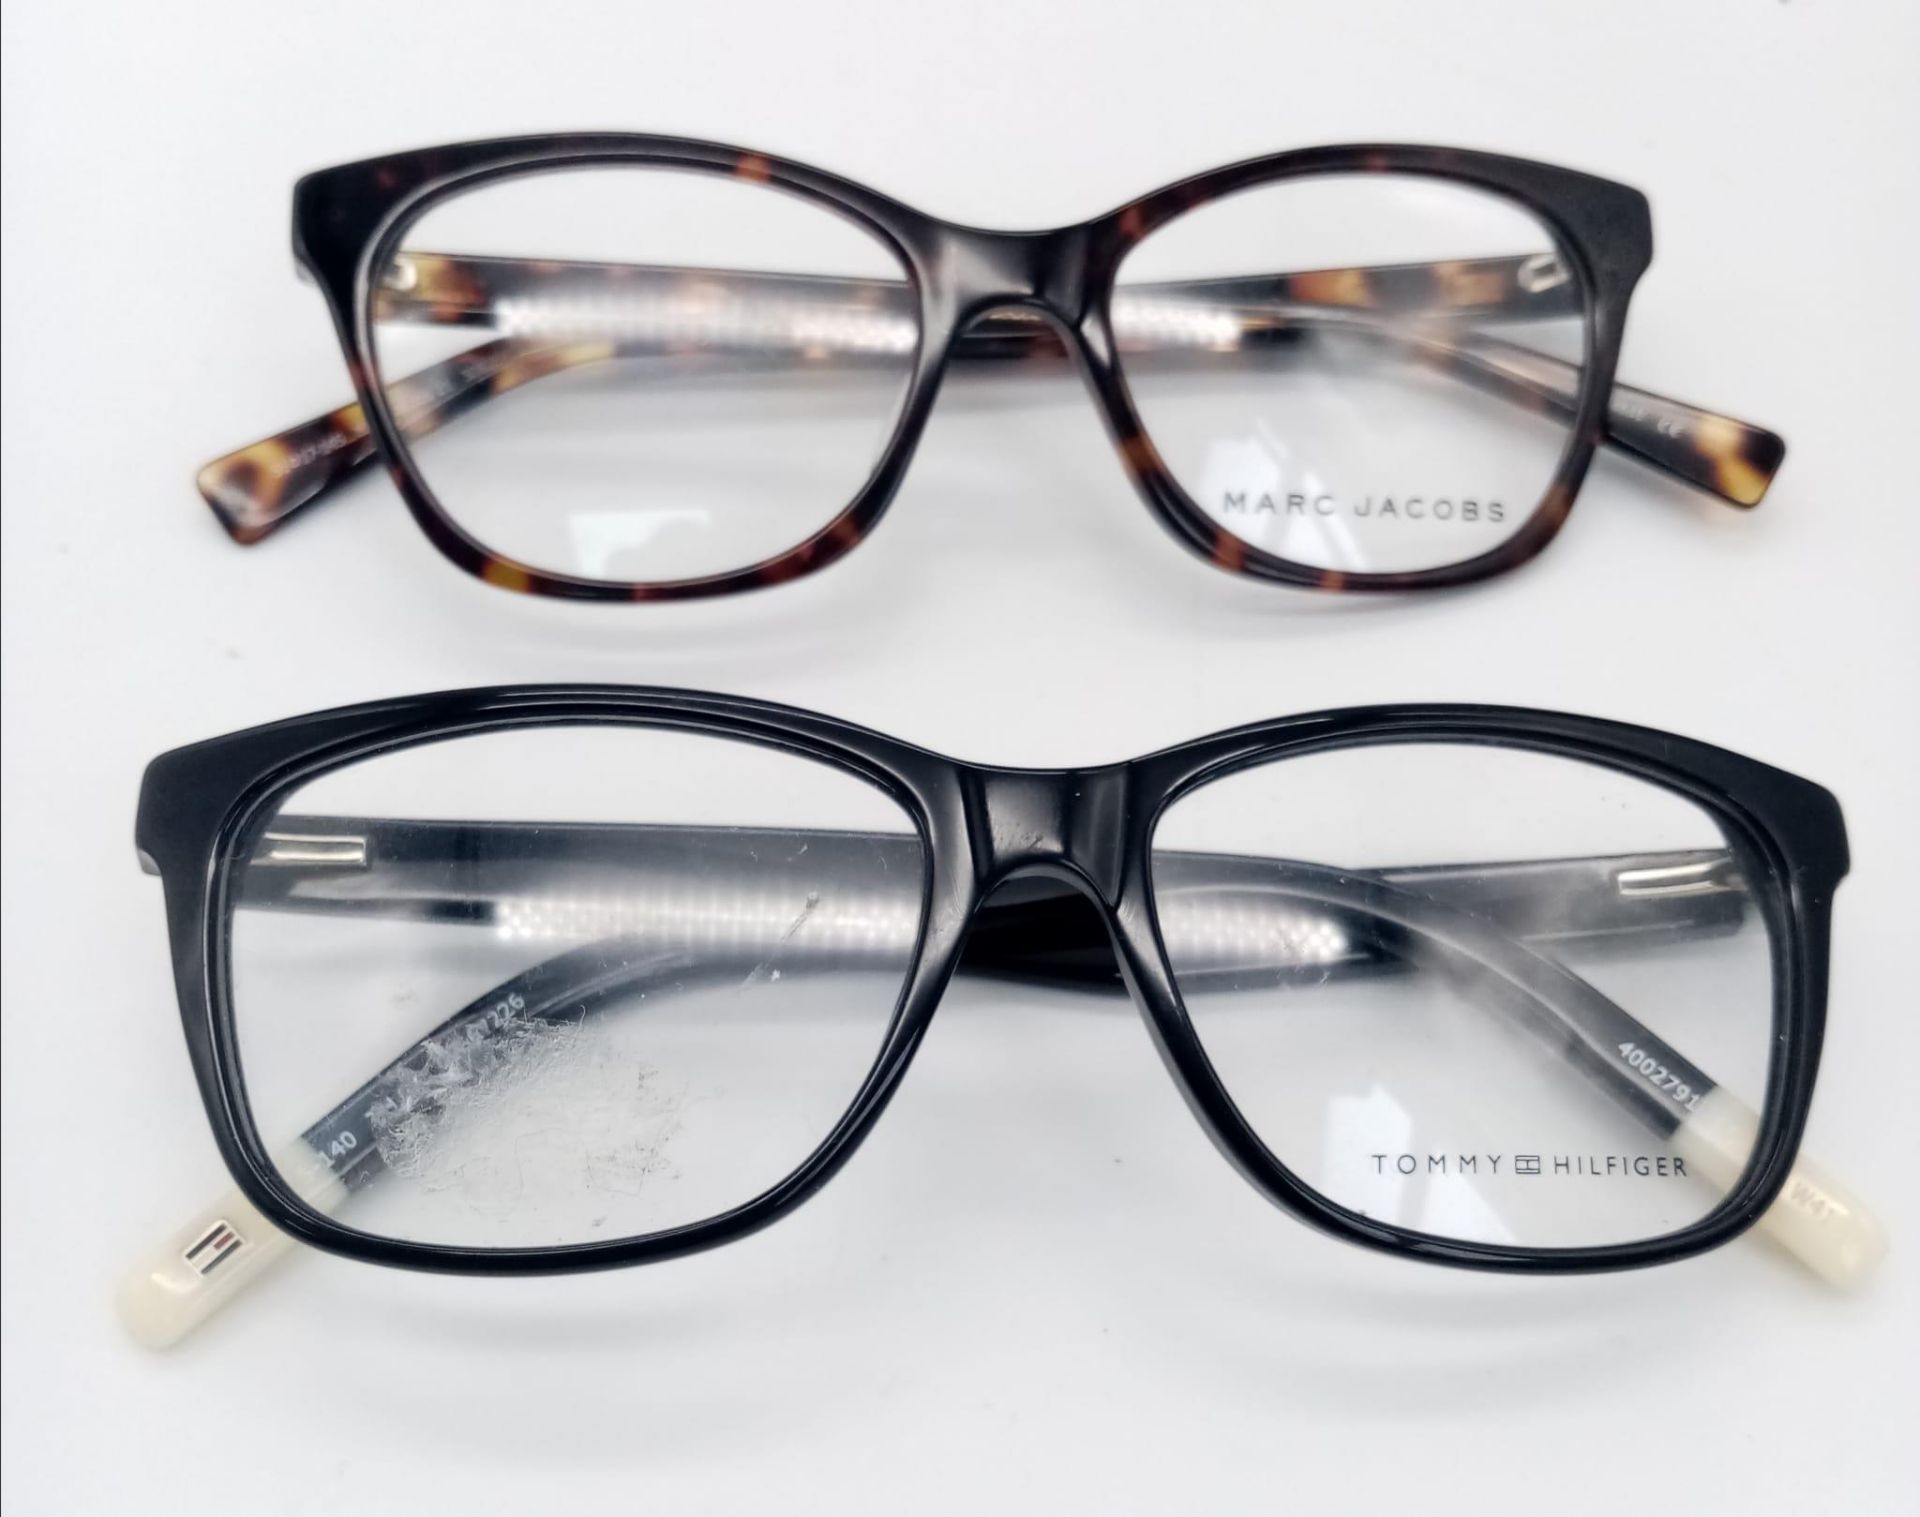 Two Pairs of Designer Glasses - Marc Jacobs and Tommy Hilfiger. - Image 4 of 6